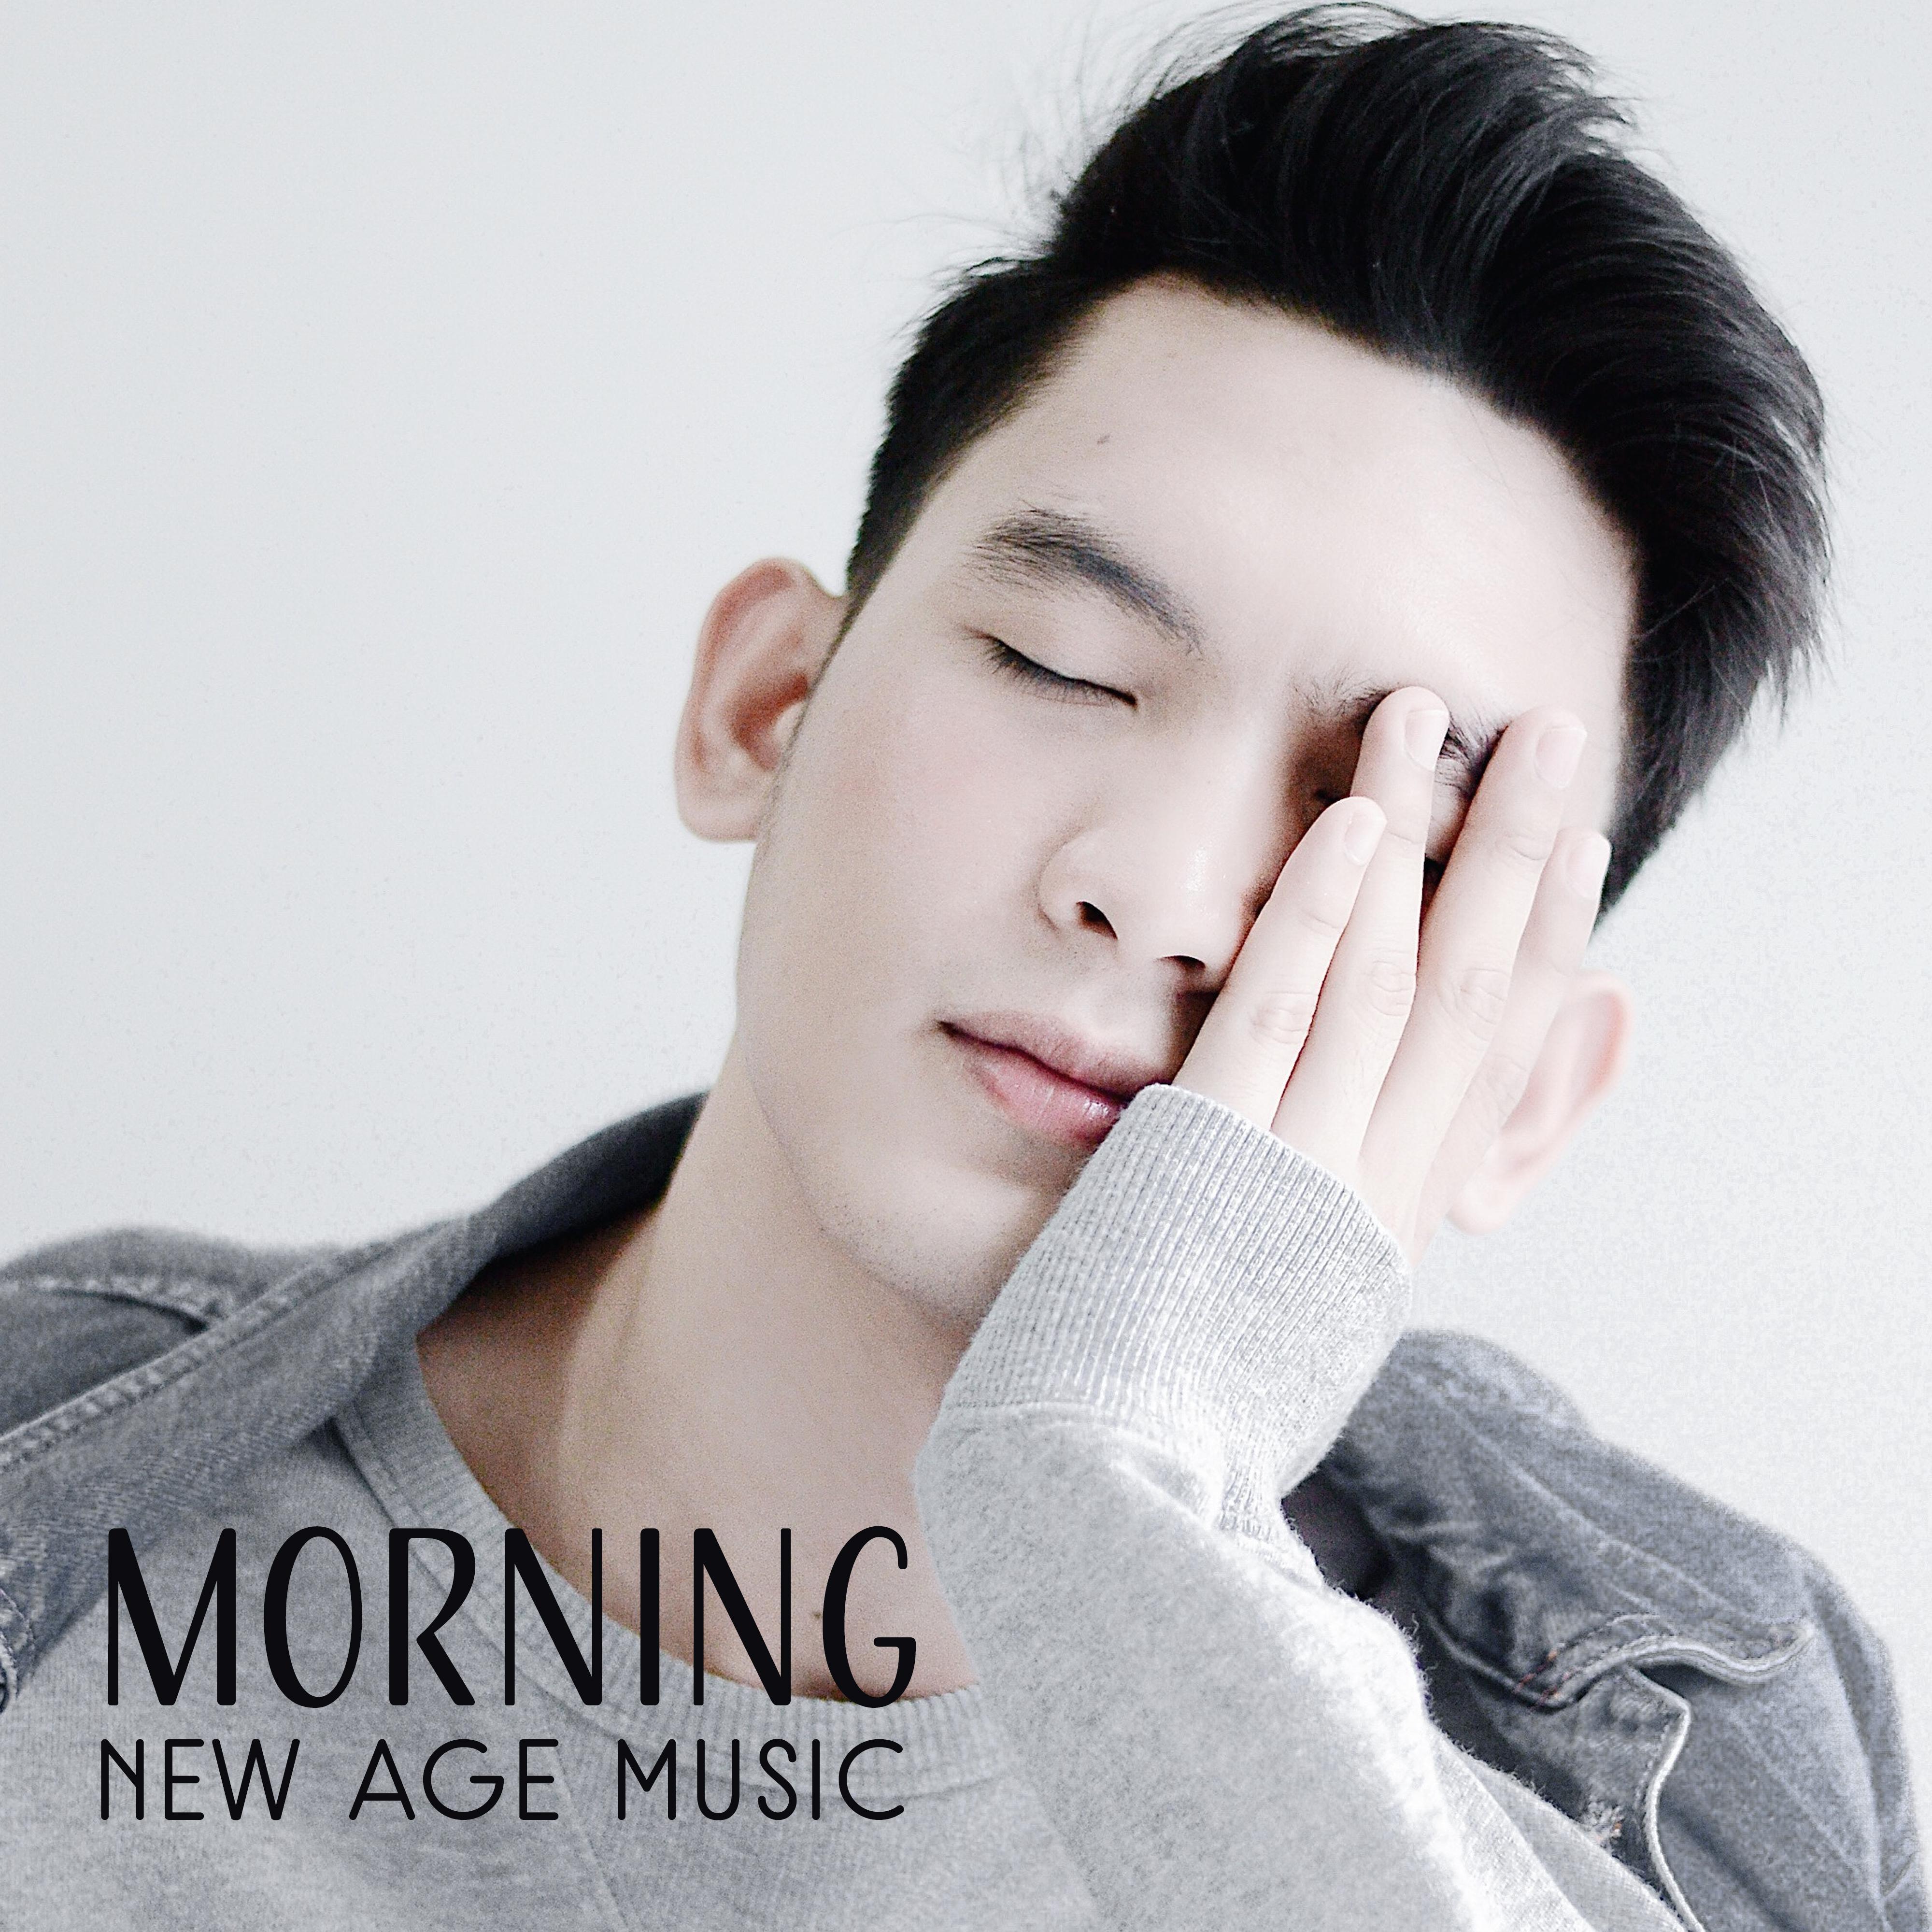 Morning New Age Music – Rest in Bed, Relaxing Sounds, Time for Coffee, Peaceful Morning